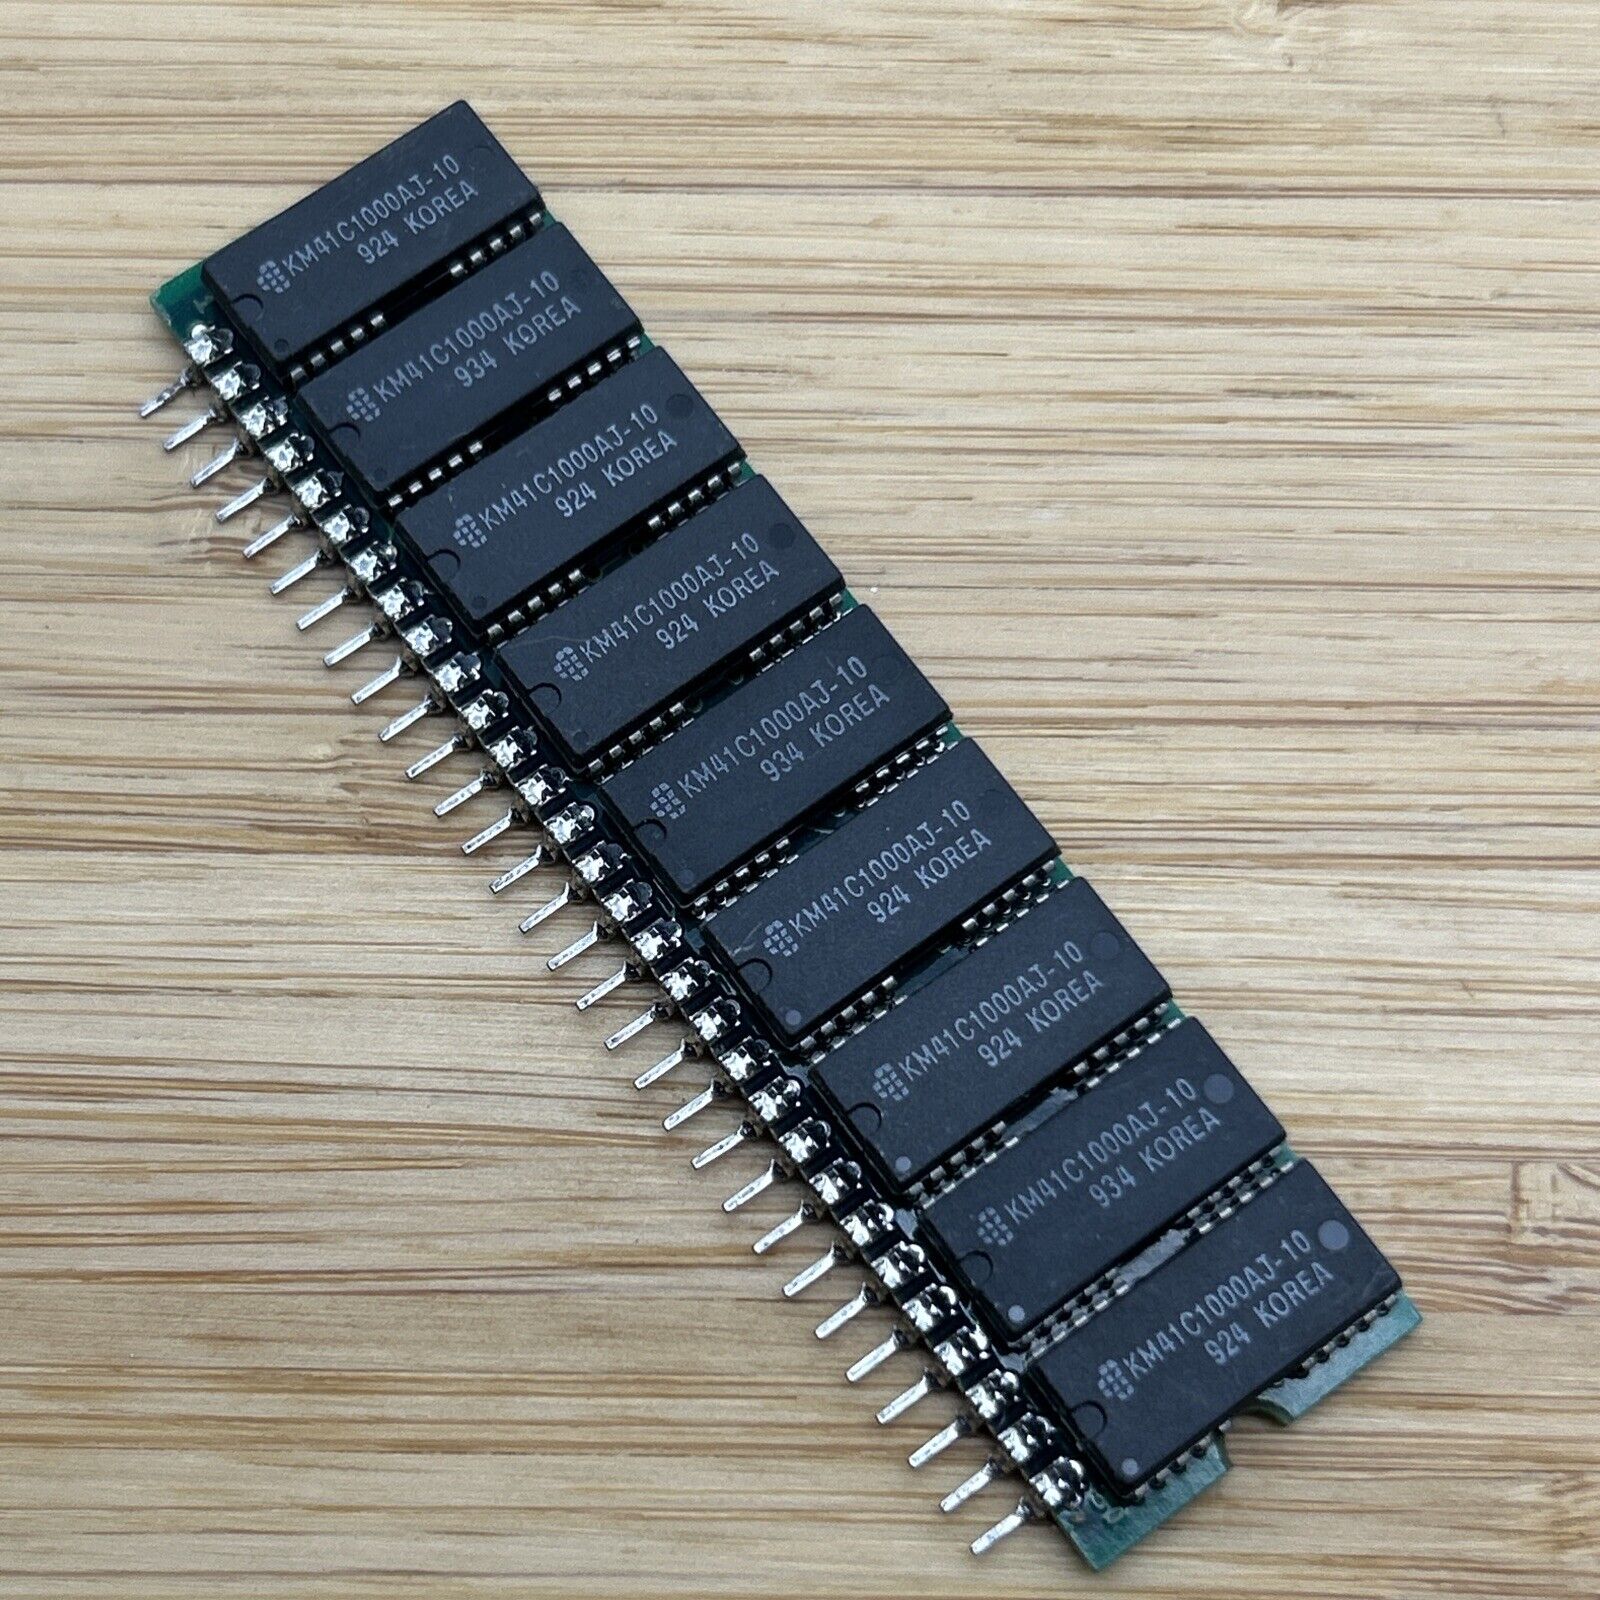 1MB SIPP Memory Module, 100ns, 1x9 9 Chip Parity Ram Very Rare 1 MB SIPPS